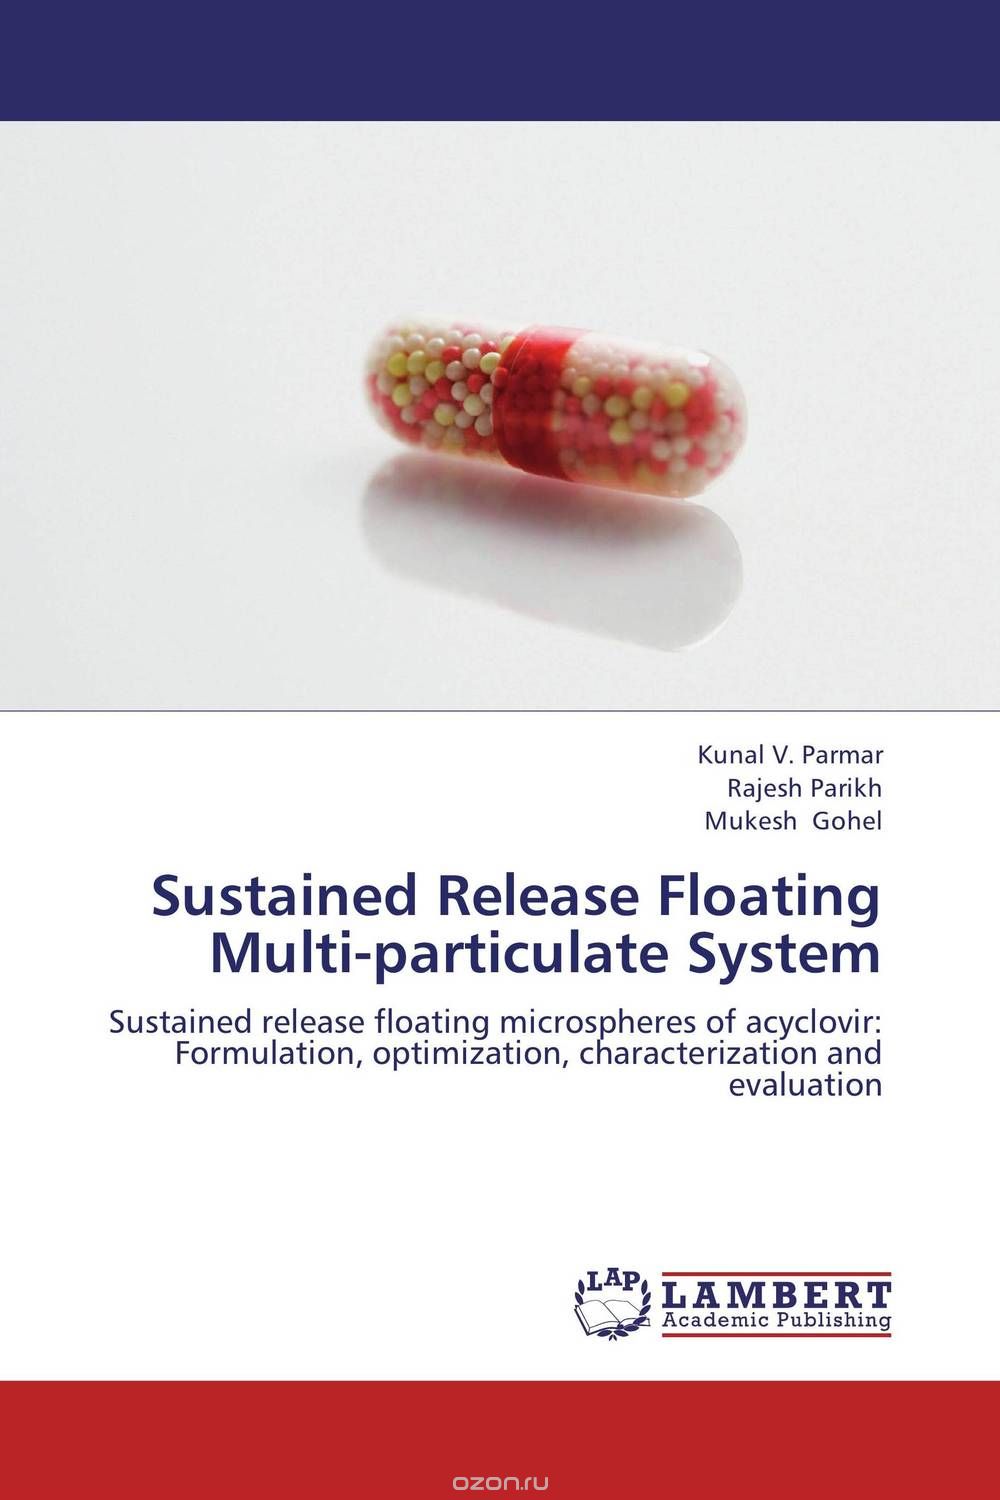 Скачать книгу "Sustained Release Floating Multi-particulate System"